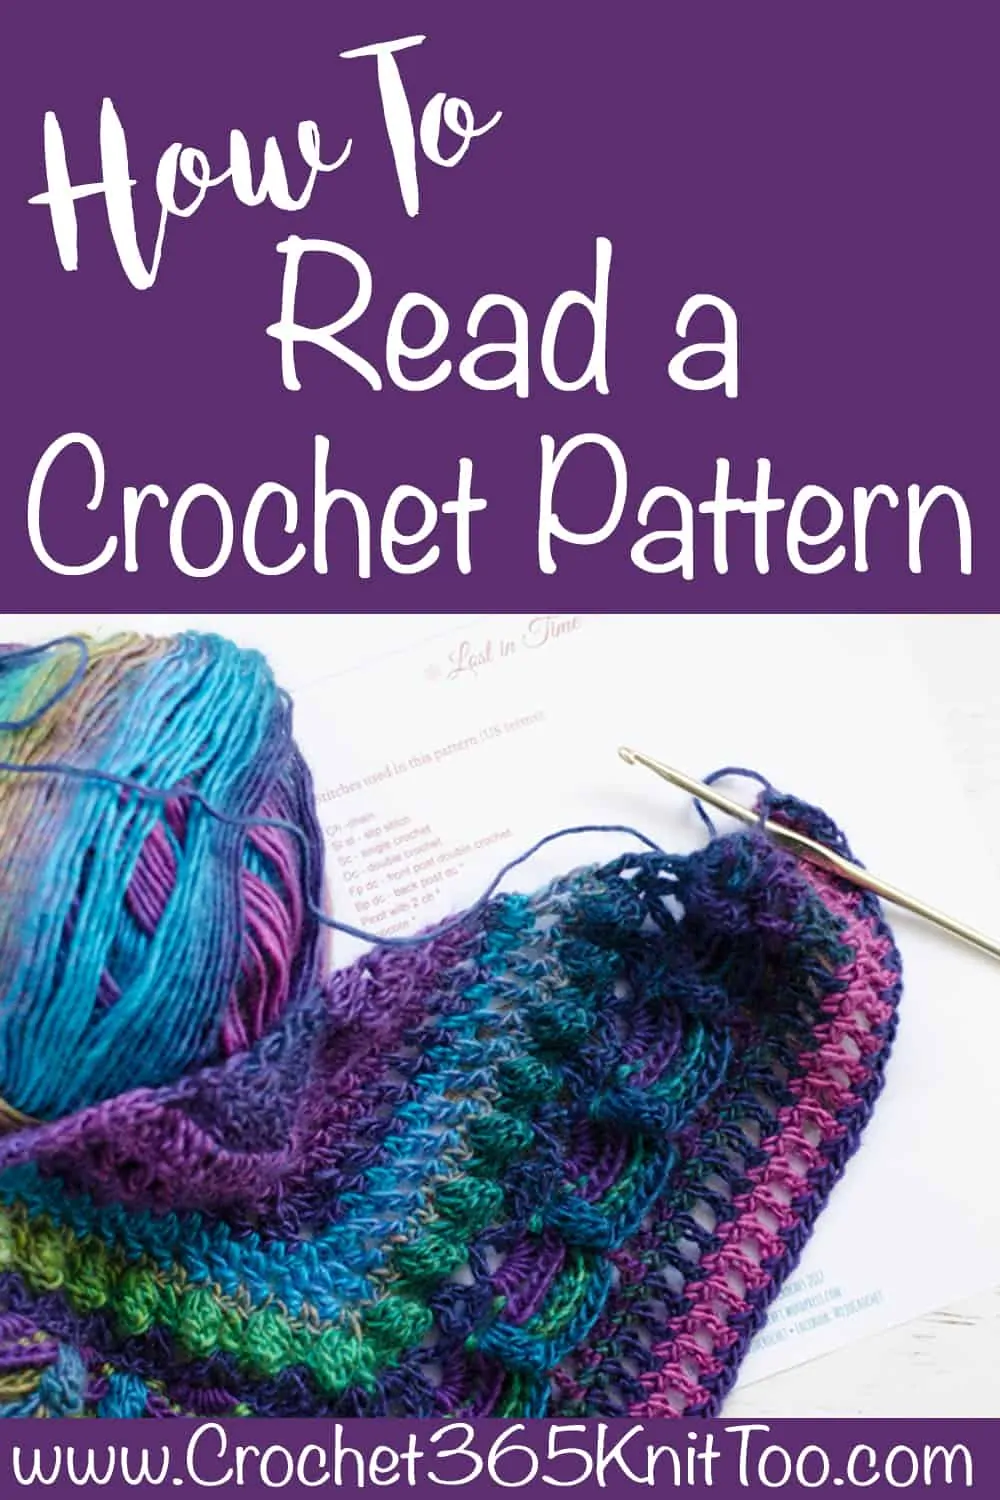 How to read a crochet pattern.